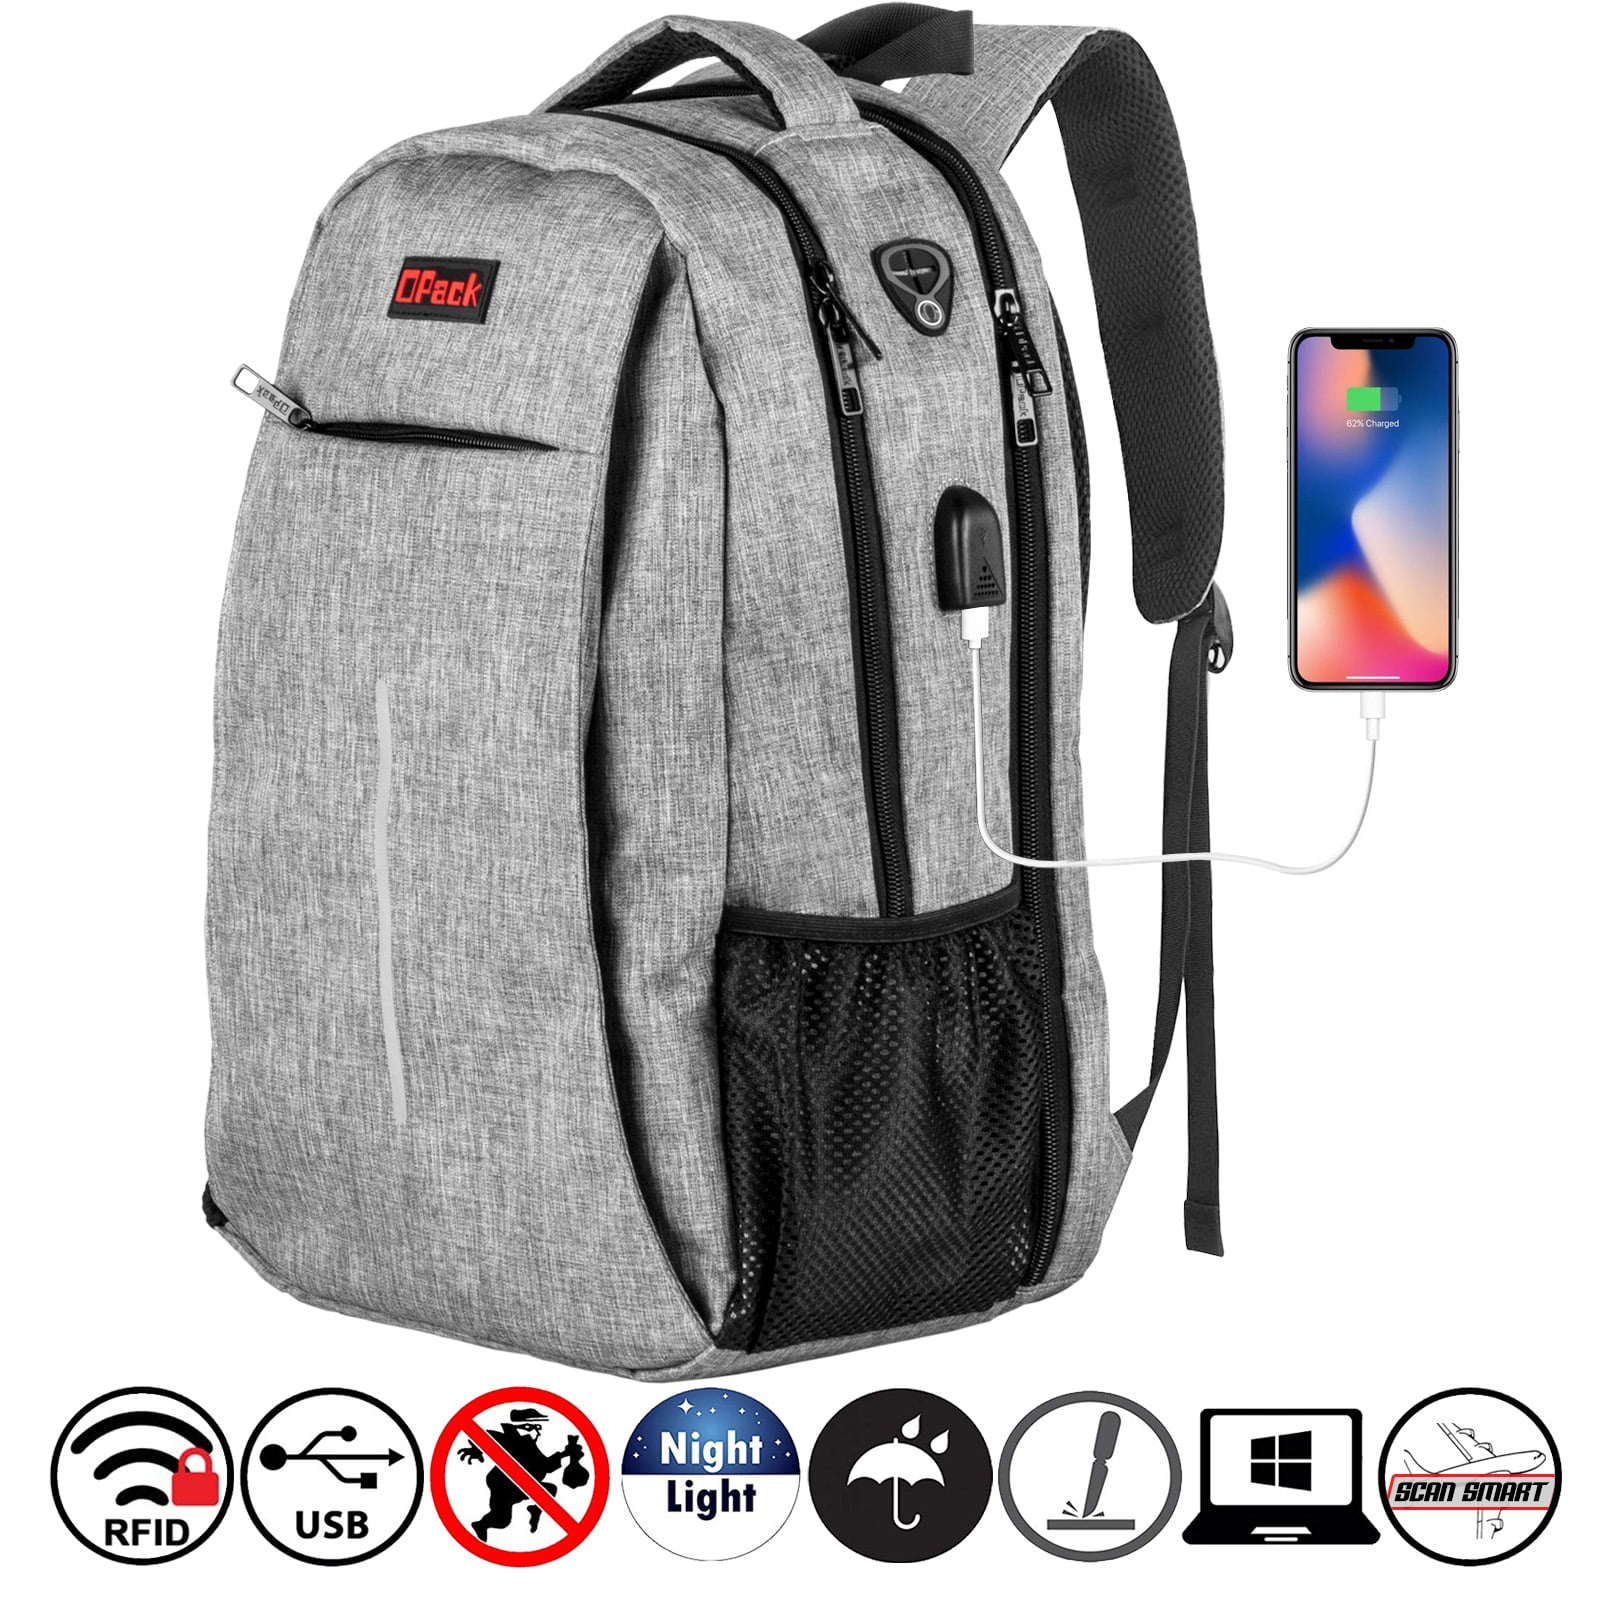 Ecto 1A Plate Ghostbusters Backpack Daypack Rucksack Laptop Shoulder Bag with USB Charging Port 